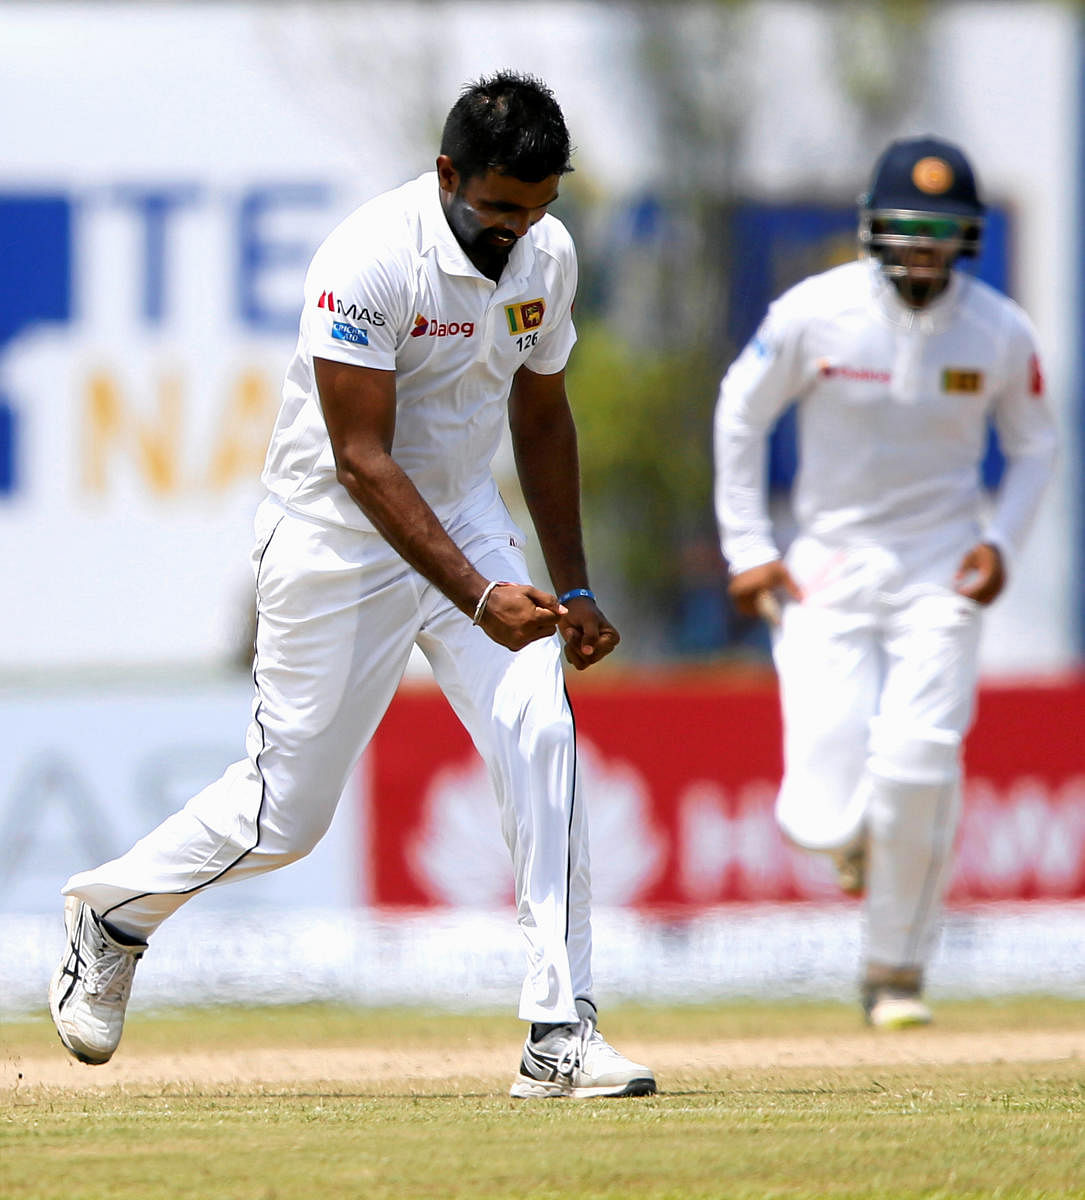 Wrecker-in-chief: Sri Lanka's Dilruwan Perera celebrates after dismissing South Africa's Quinton de Kock on Friday. REUTERS